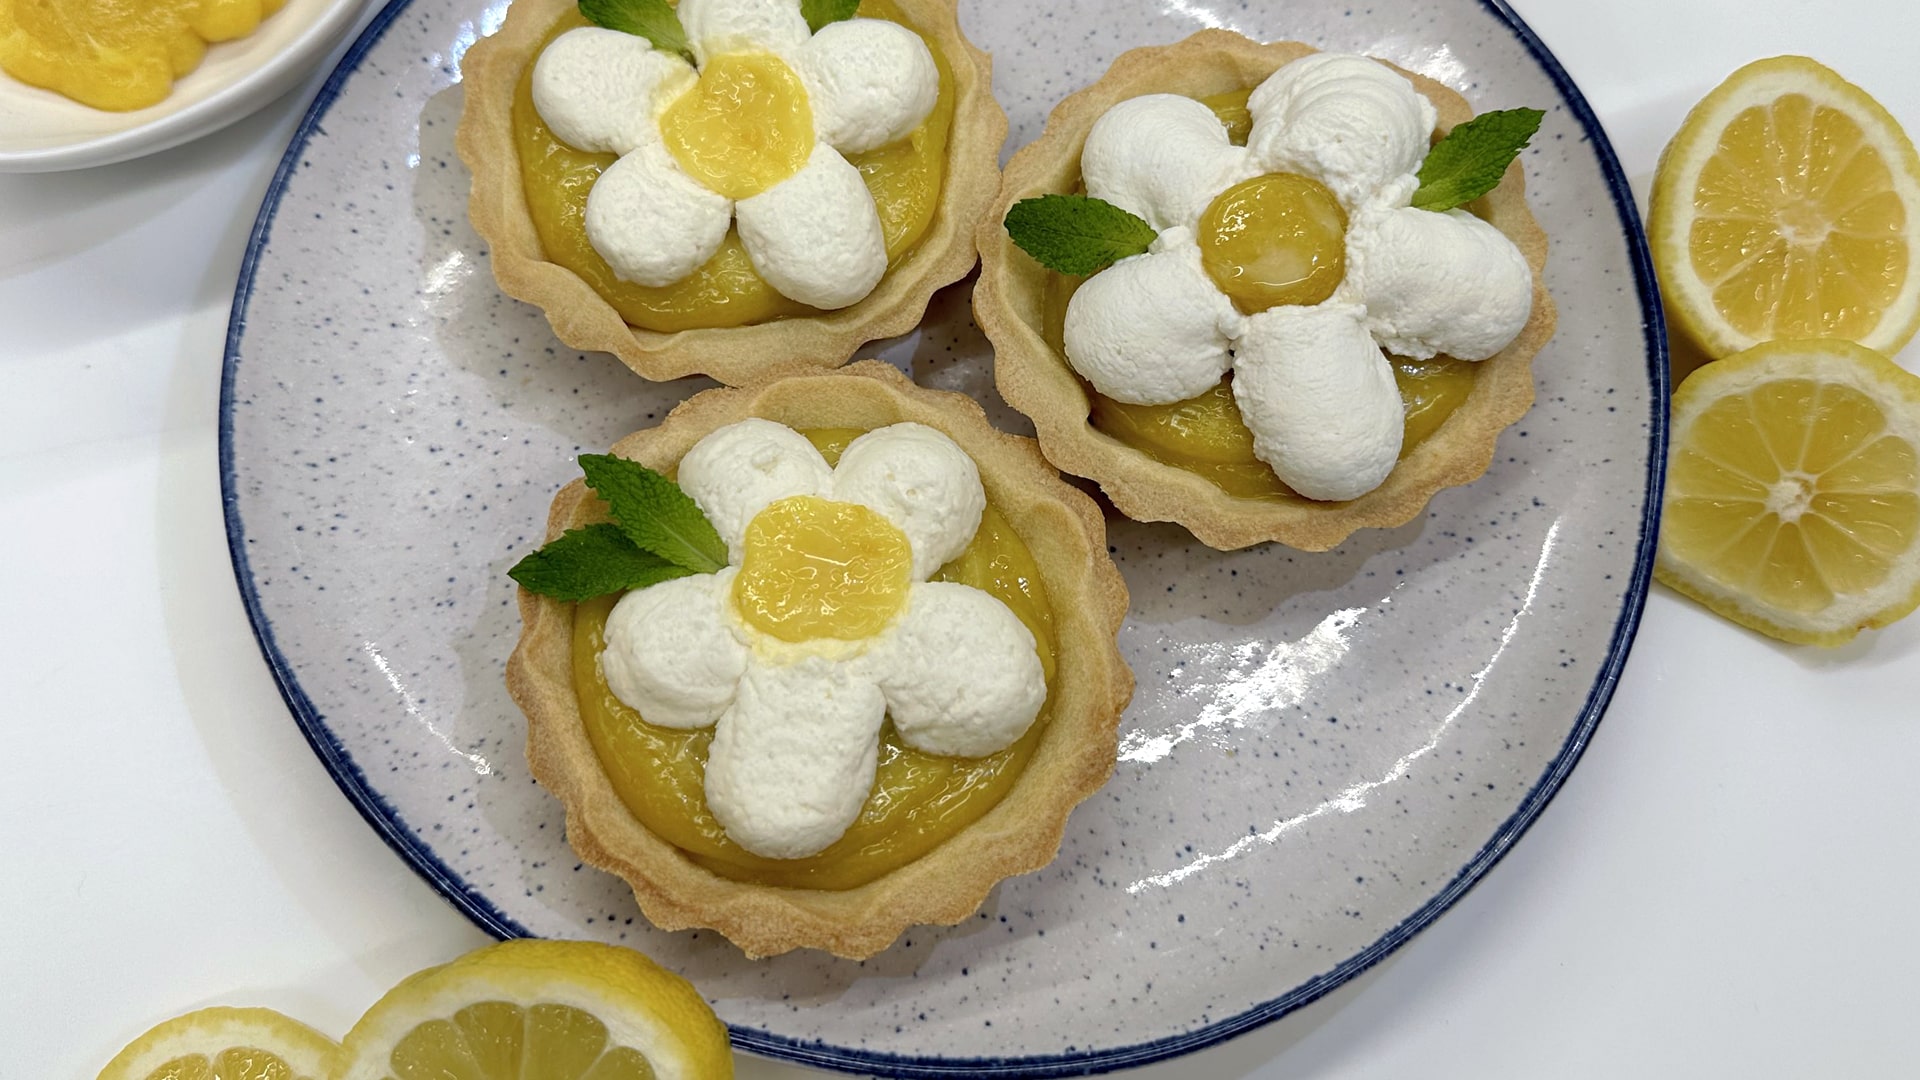 Lemon tartlets surrounded by an assortment of cut and whole lemons.